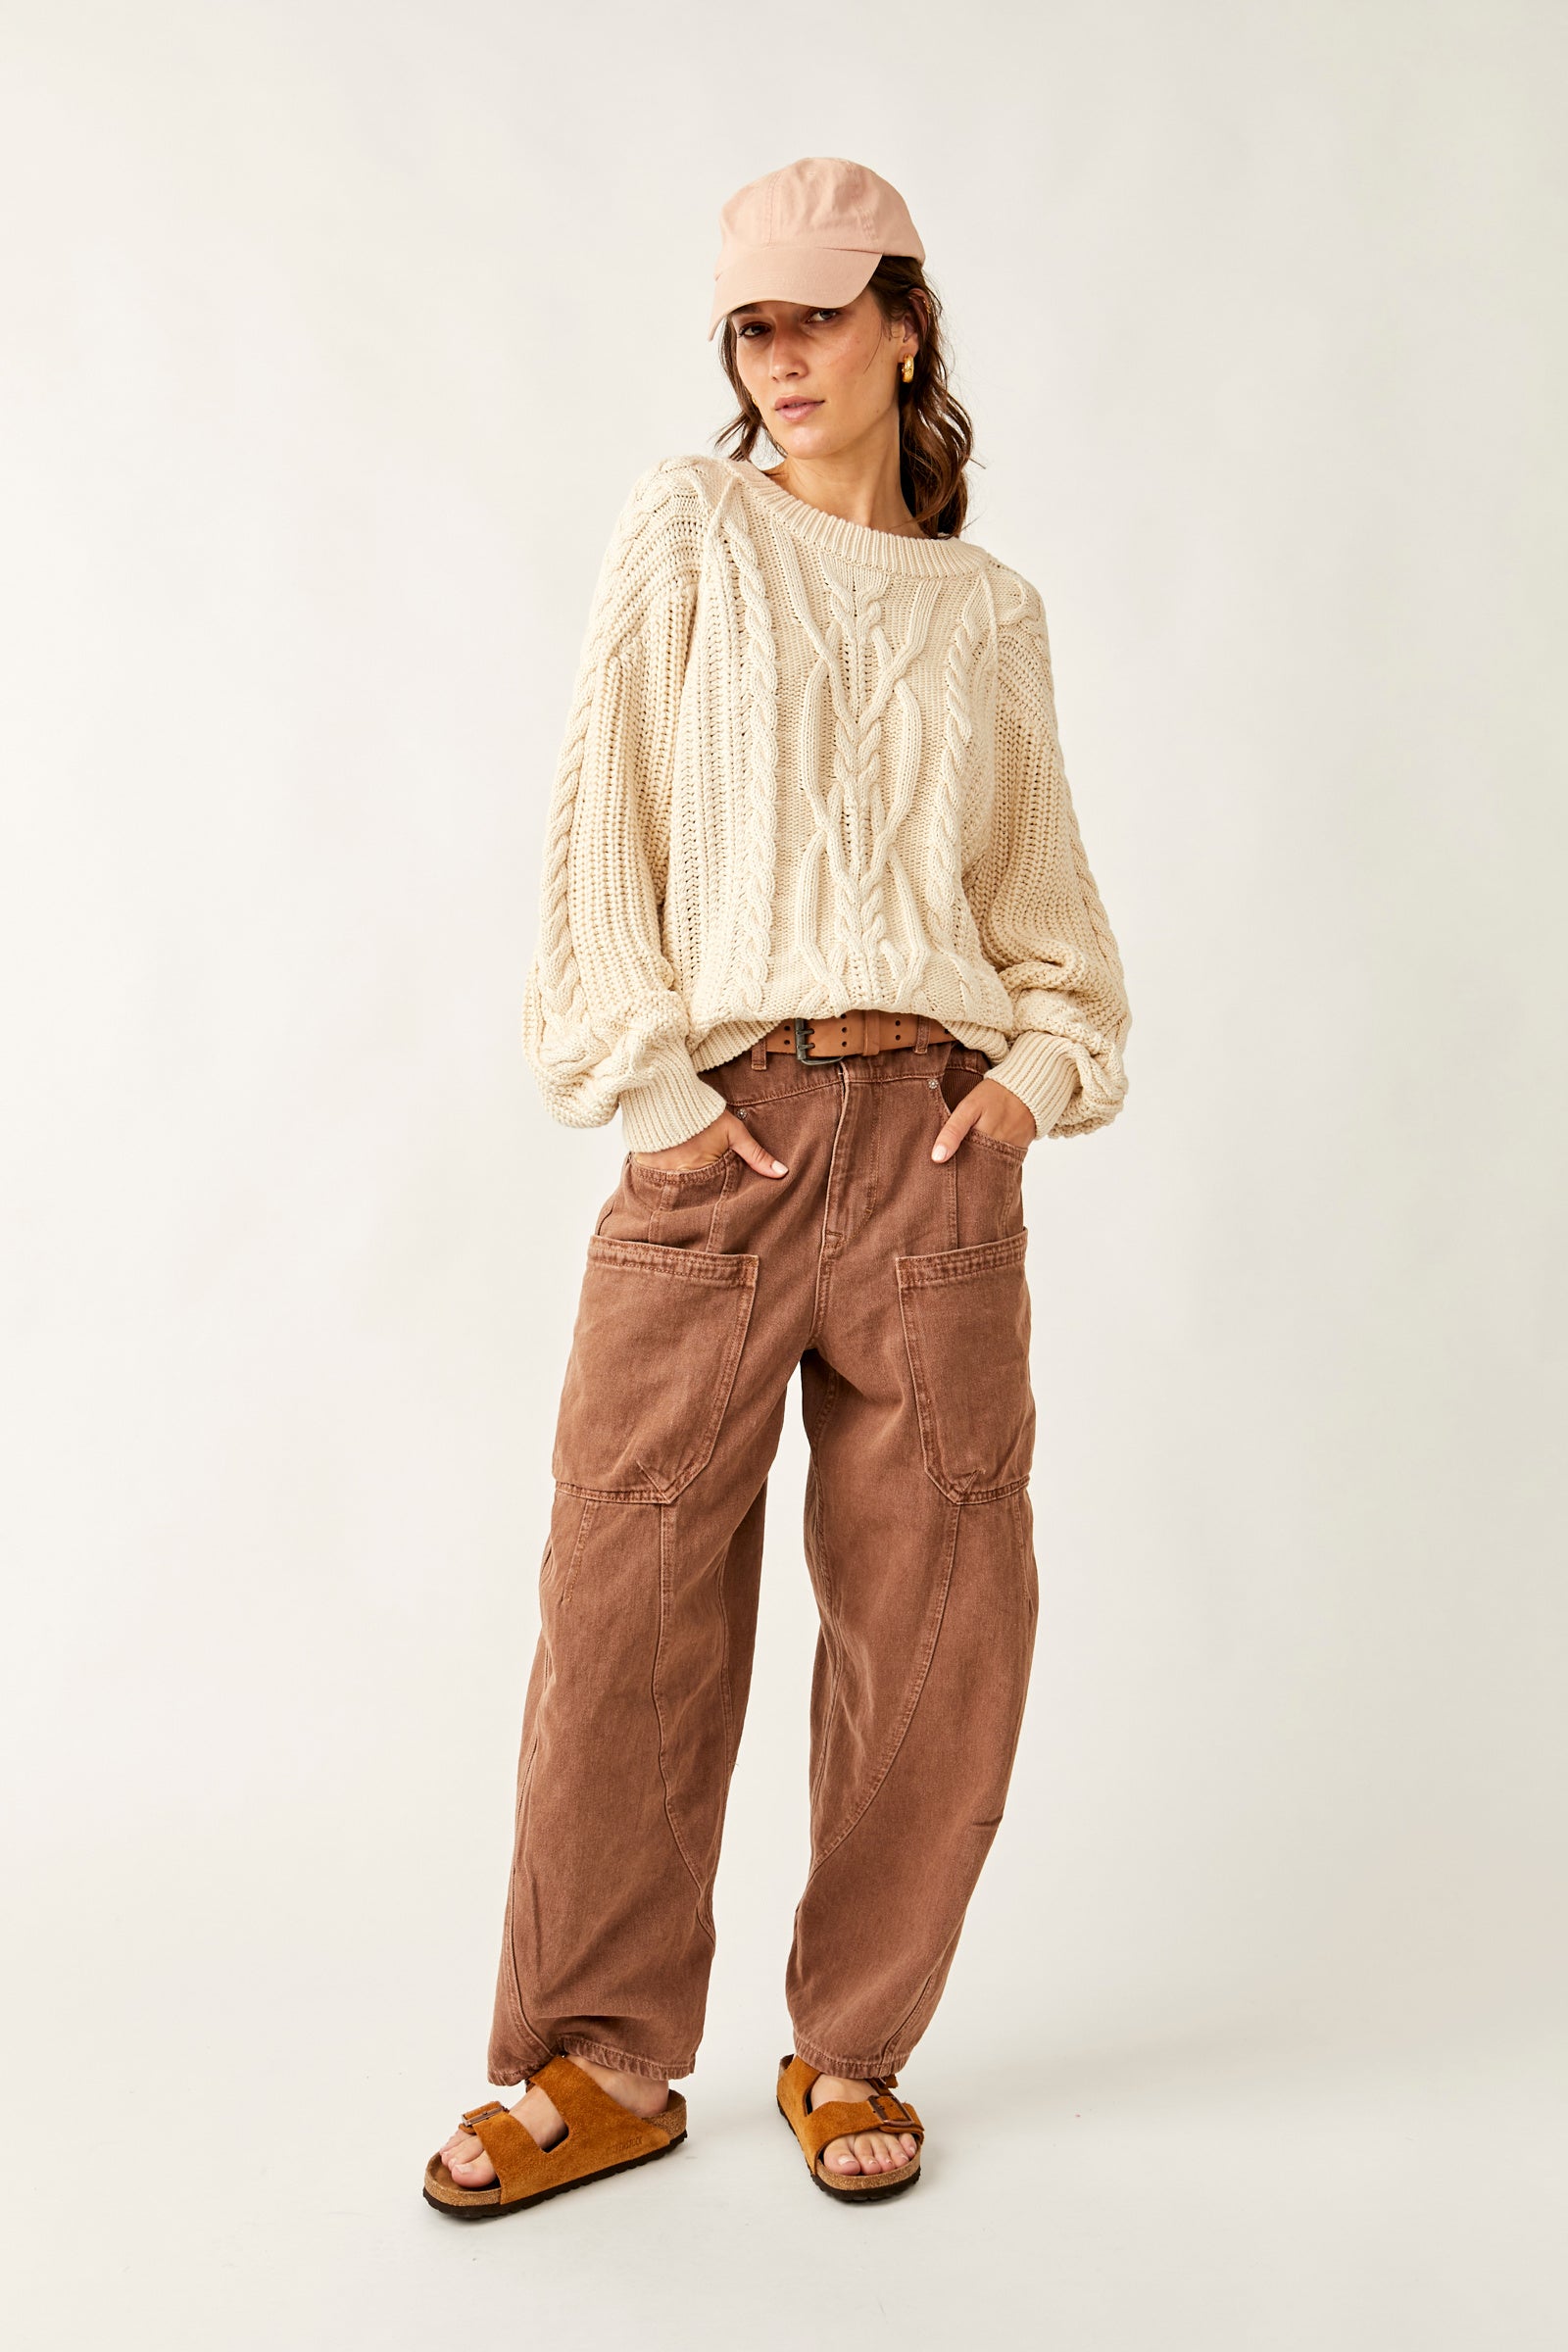 Free People Frankie Cable Sweater Ivory